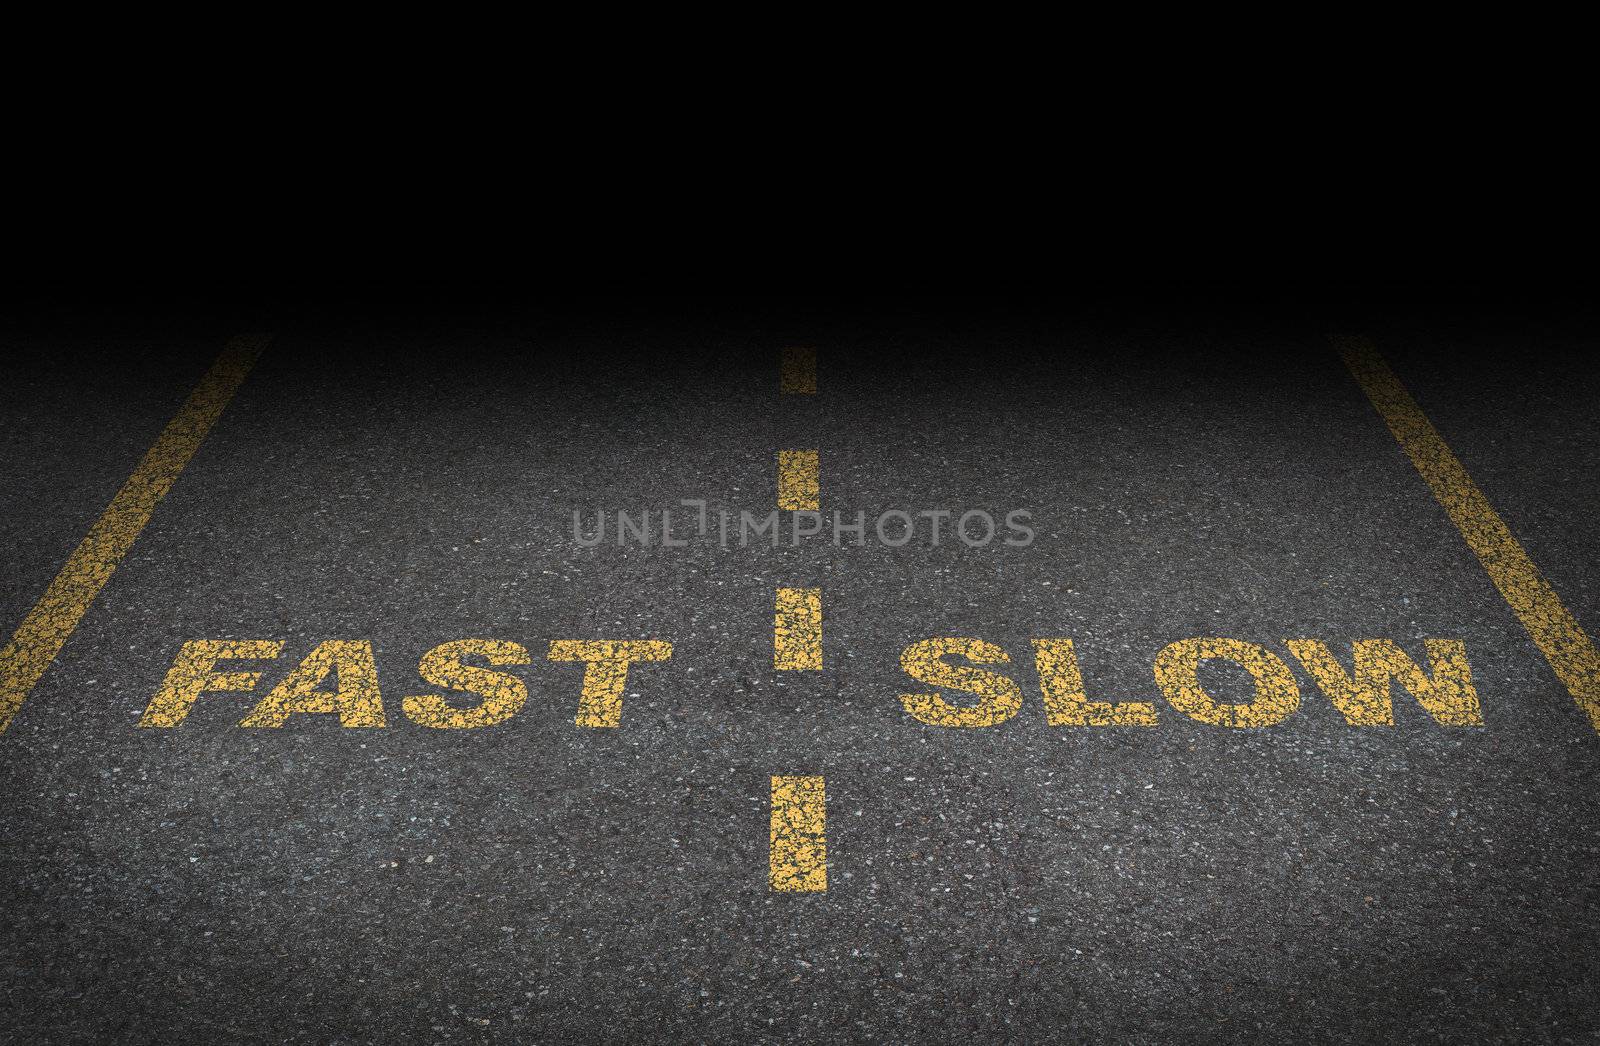 Fast and slow lanes as a business dilemma on how to proceed with a financial plan and strategy in terms of growing more conservative or aggressive growth as an asphalt road with yellow painted dividing lines.